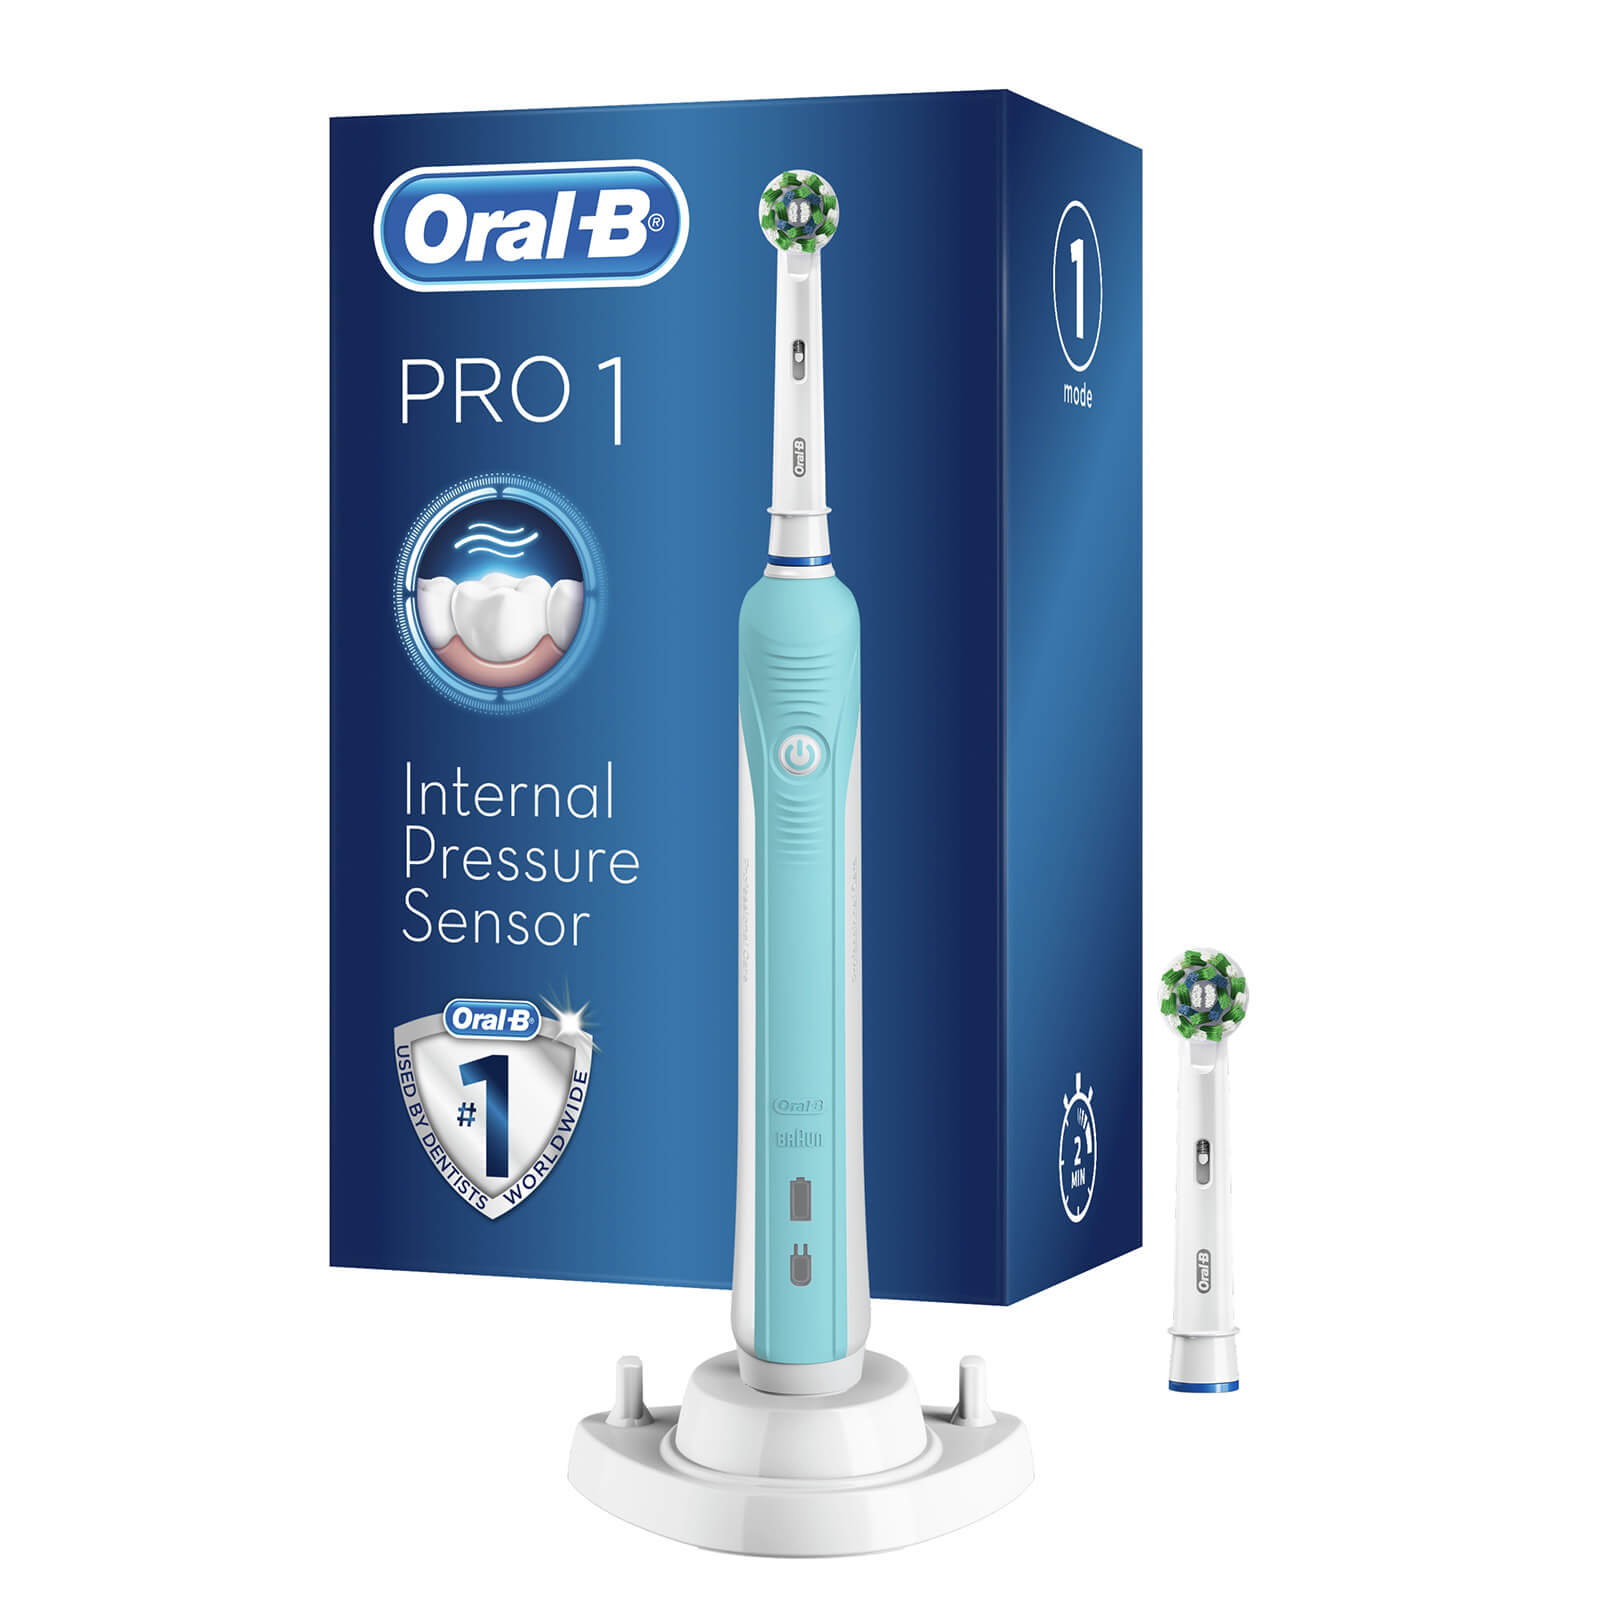 Oral-B Pro 1 670 Electric Toothbrush – Turquoise lookfantastic.com imagine